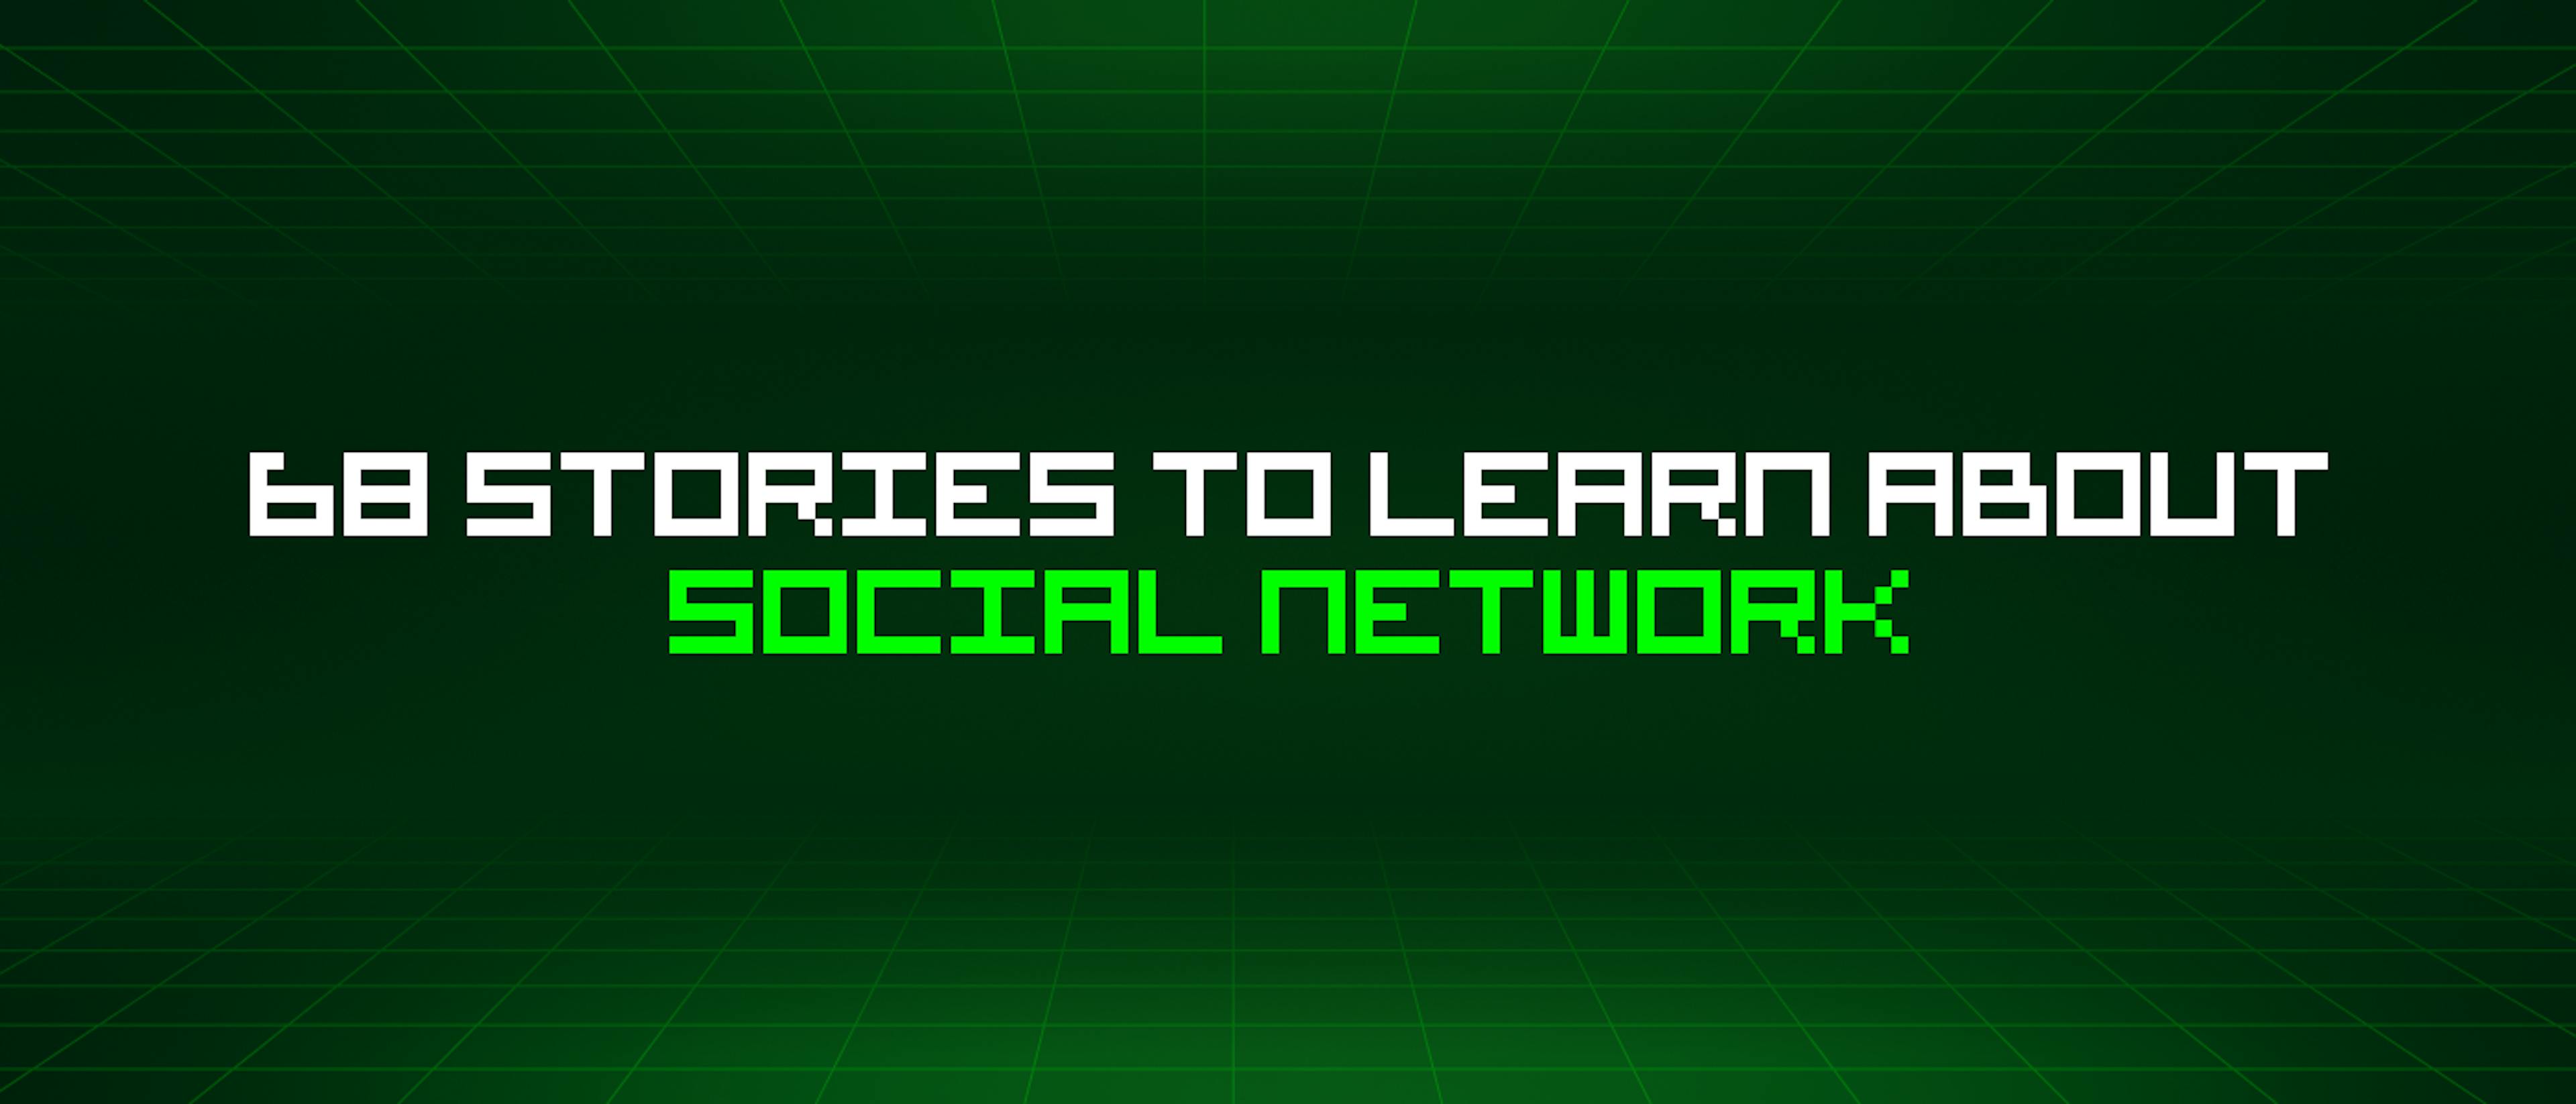 featured image - 68 Stories To Learn About Social Network